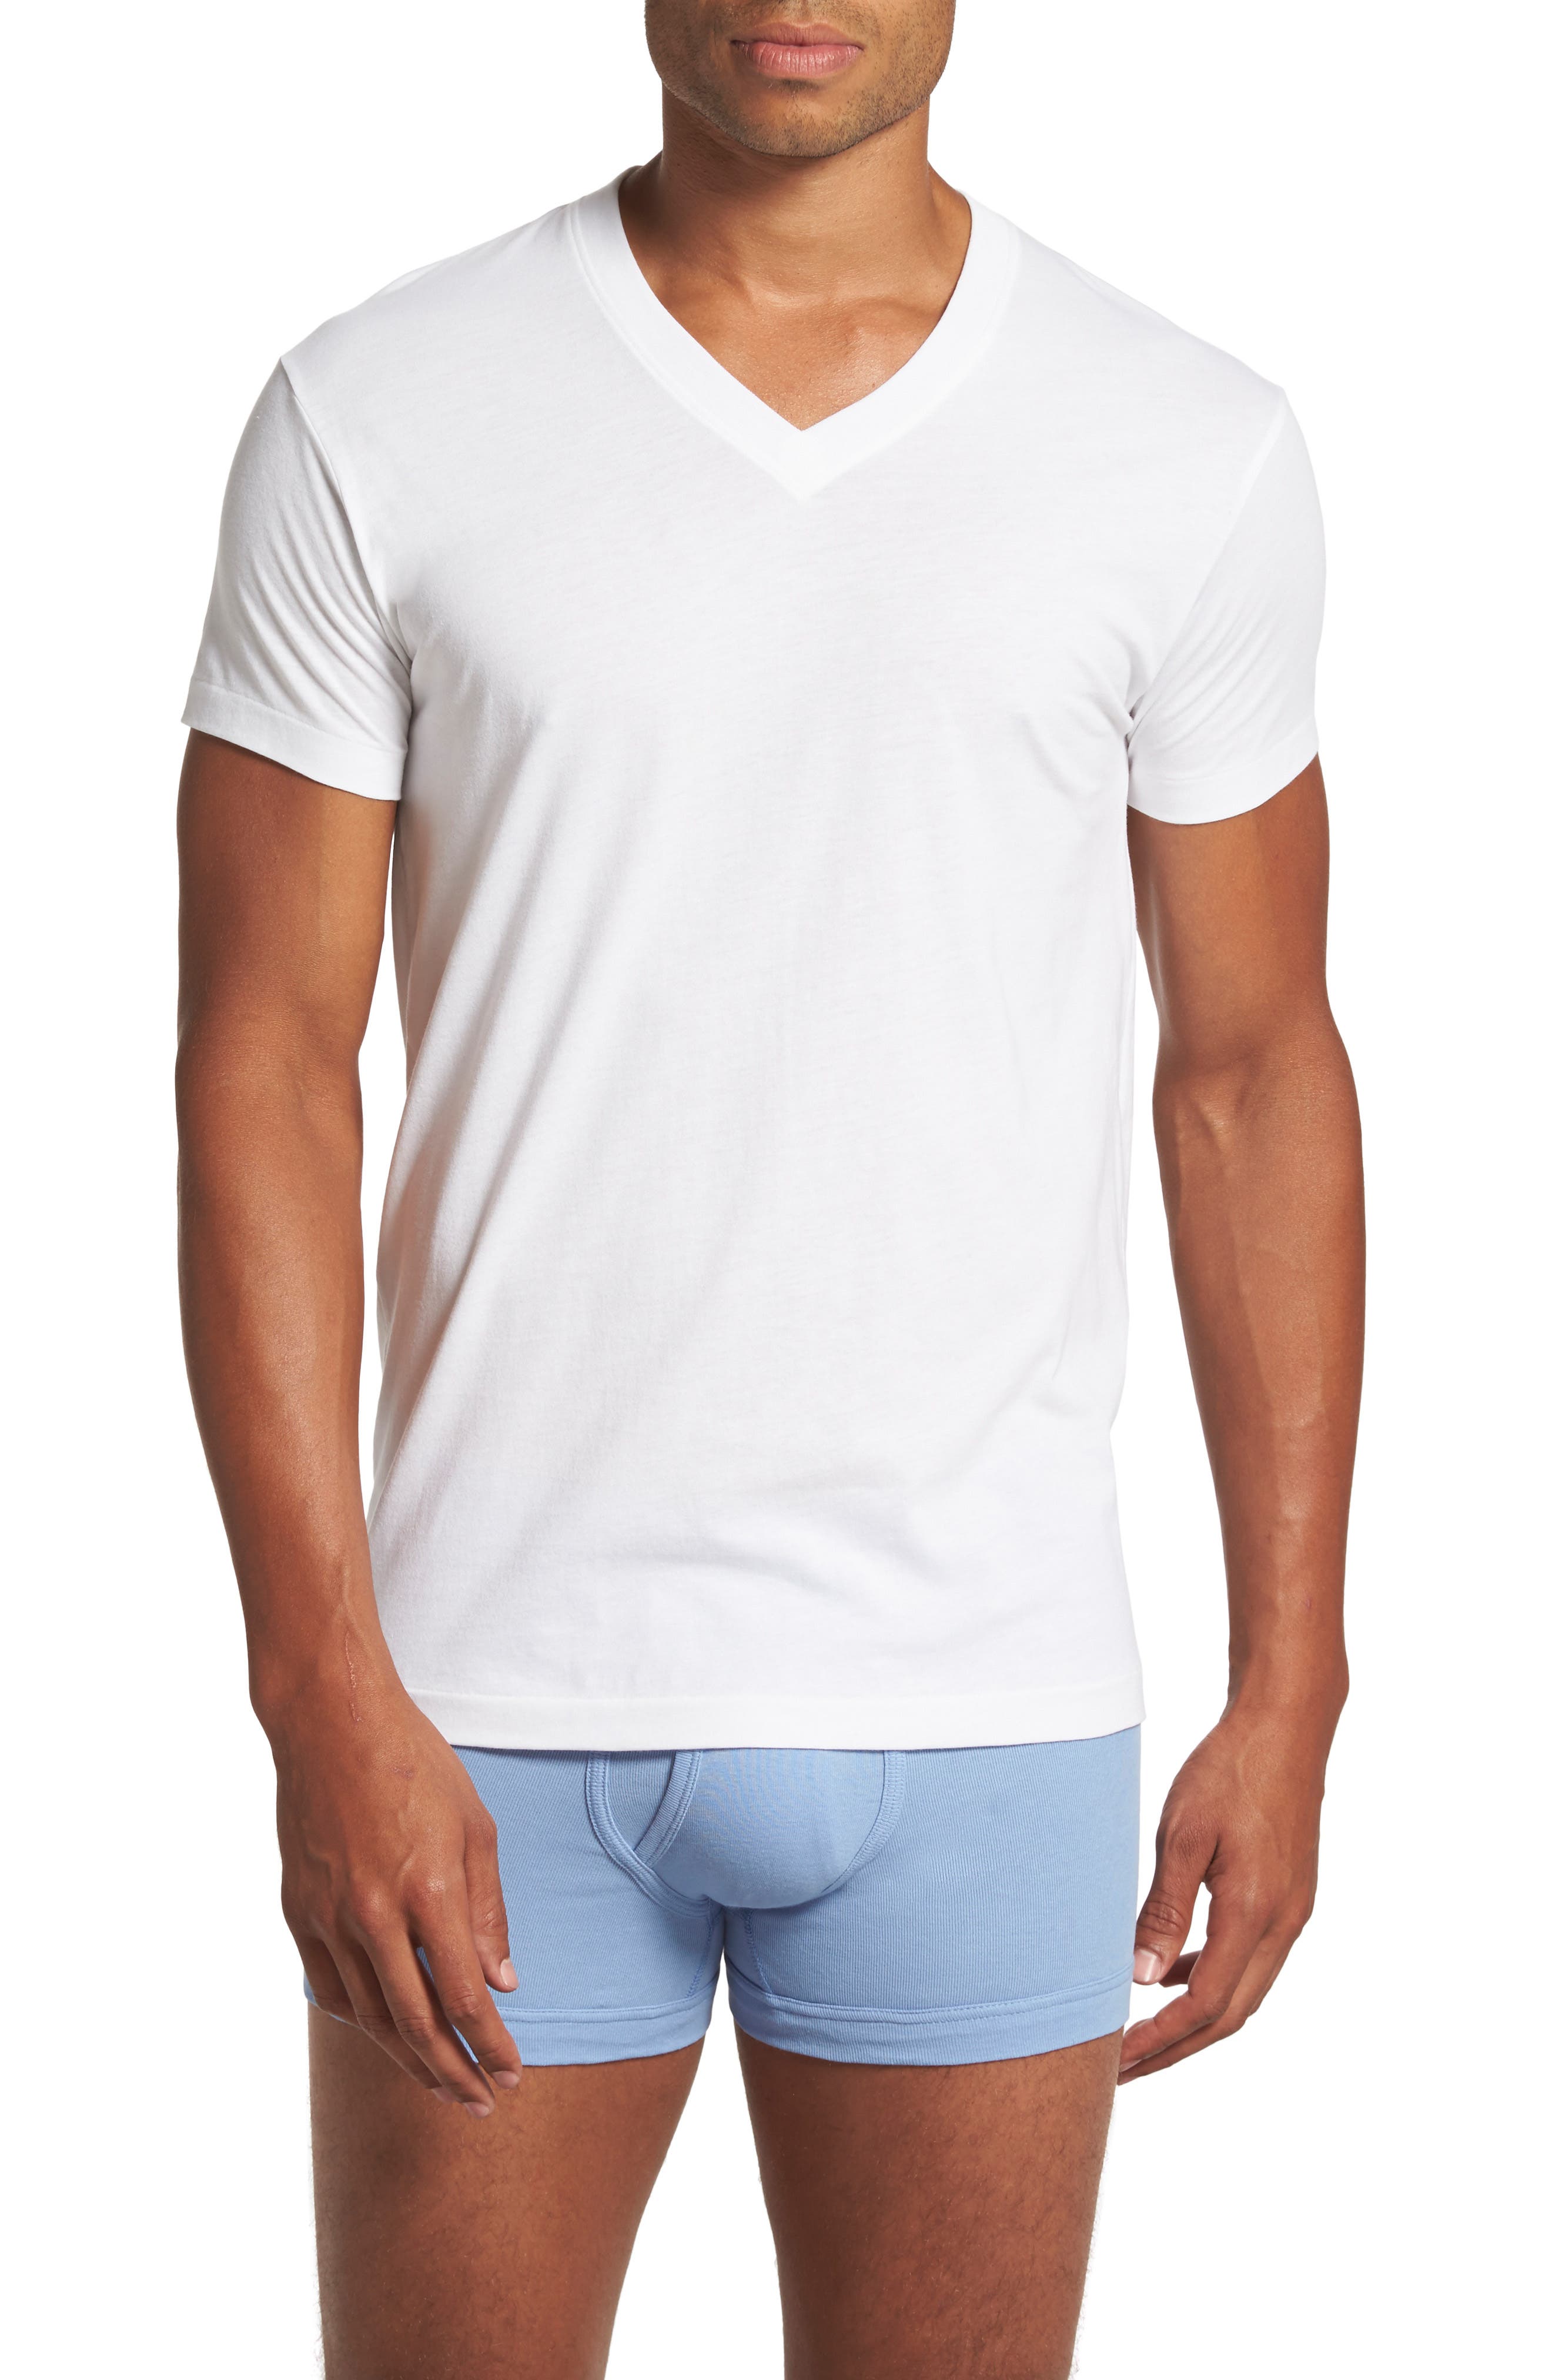 2xist 2(x)ist Pima Cotton Slim Fit V-Neck T-Shirt in White at Nordstrom